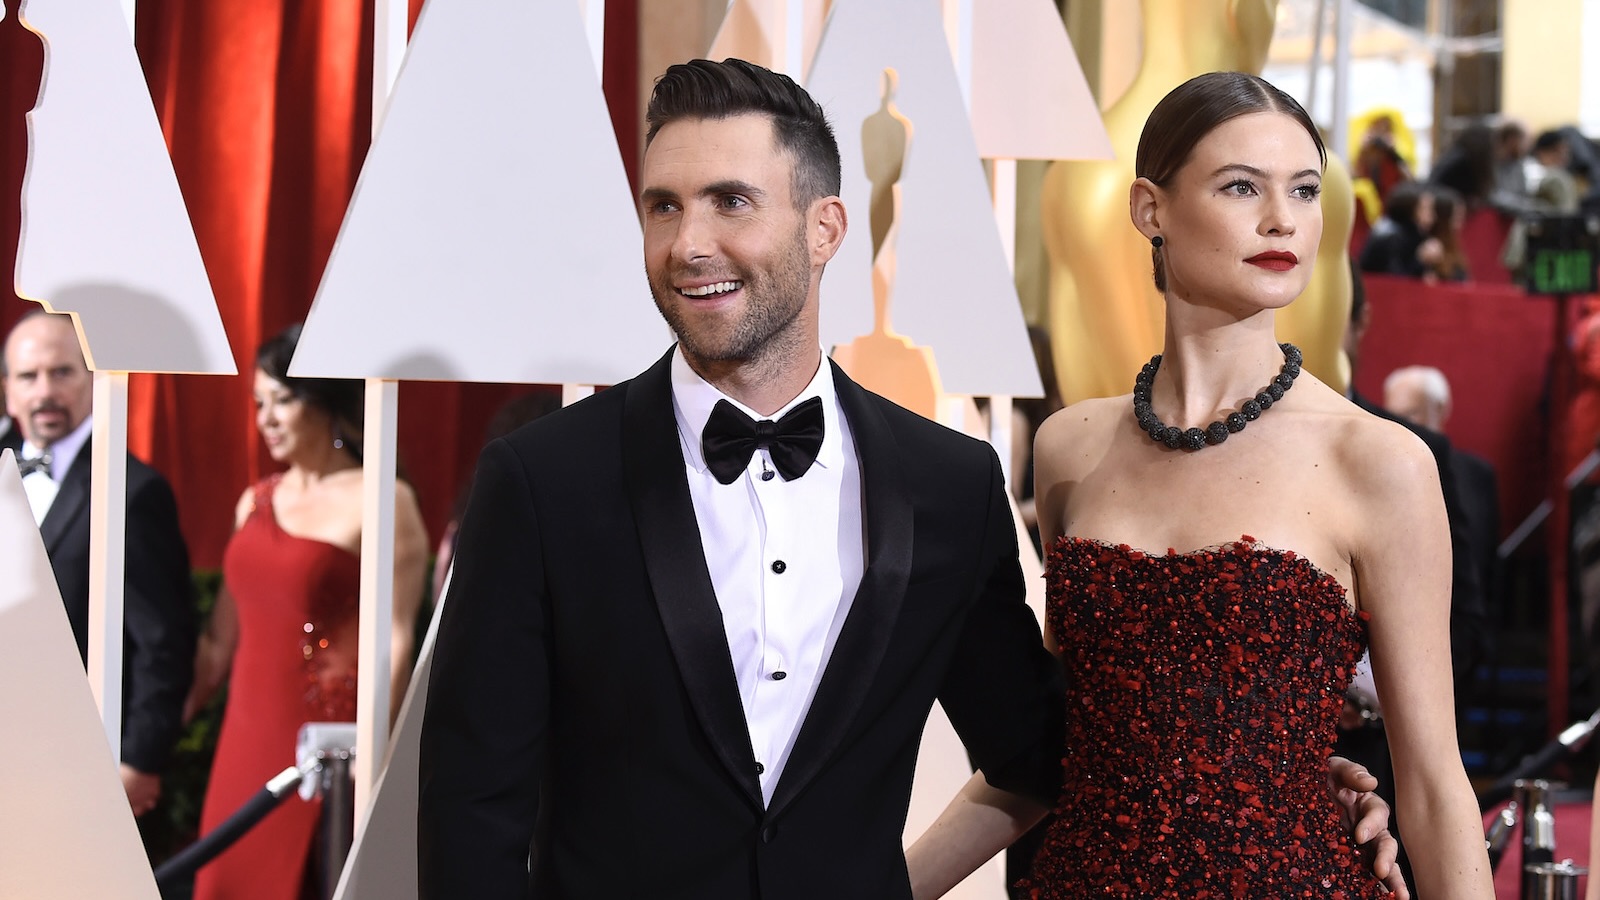 Adam Levine and Behati Prinsloo attend the 87th Annual Academy Awards at the Hollywood & Highland Center on February 22, 2015 in Hollywood, California.